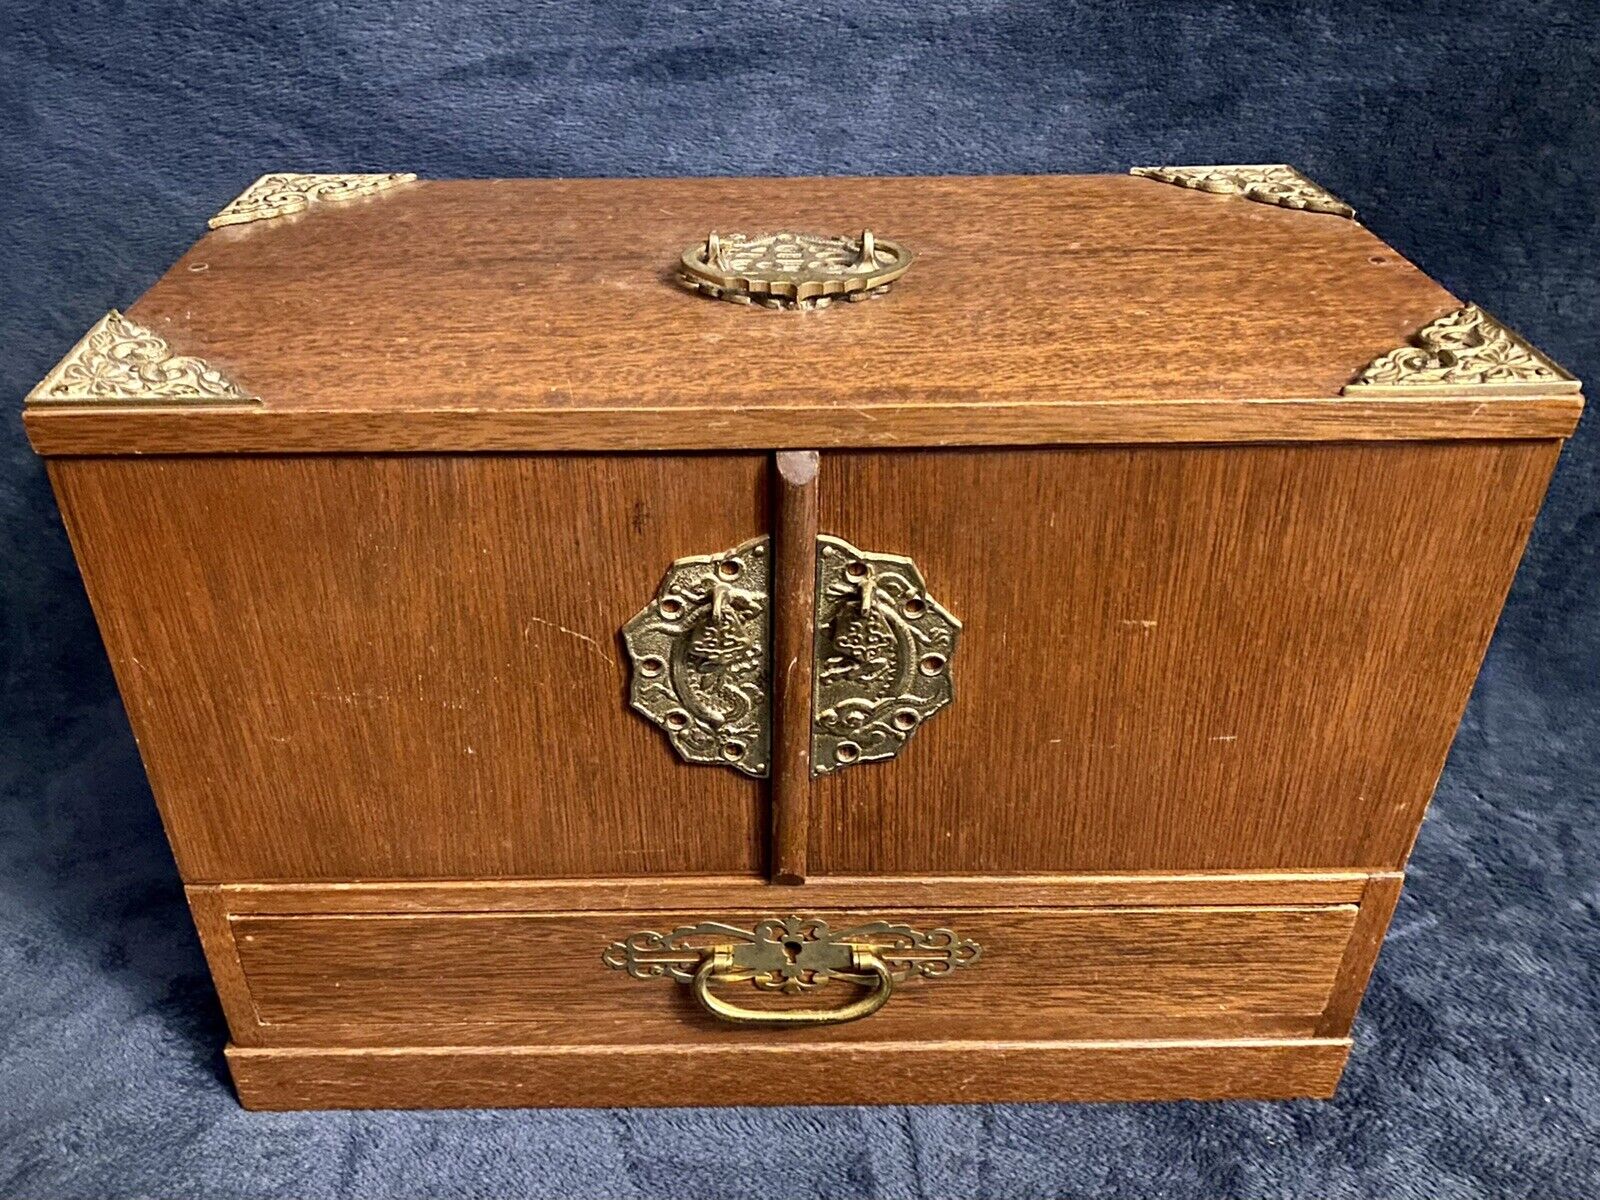 Antique Japanese Handcrafted Wood Tansu Jewelry Storage Chest Box C-1940s 14”D